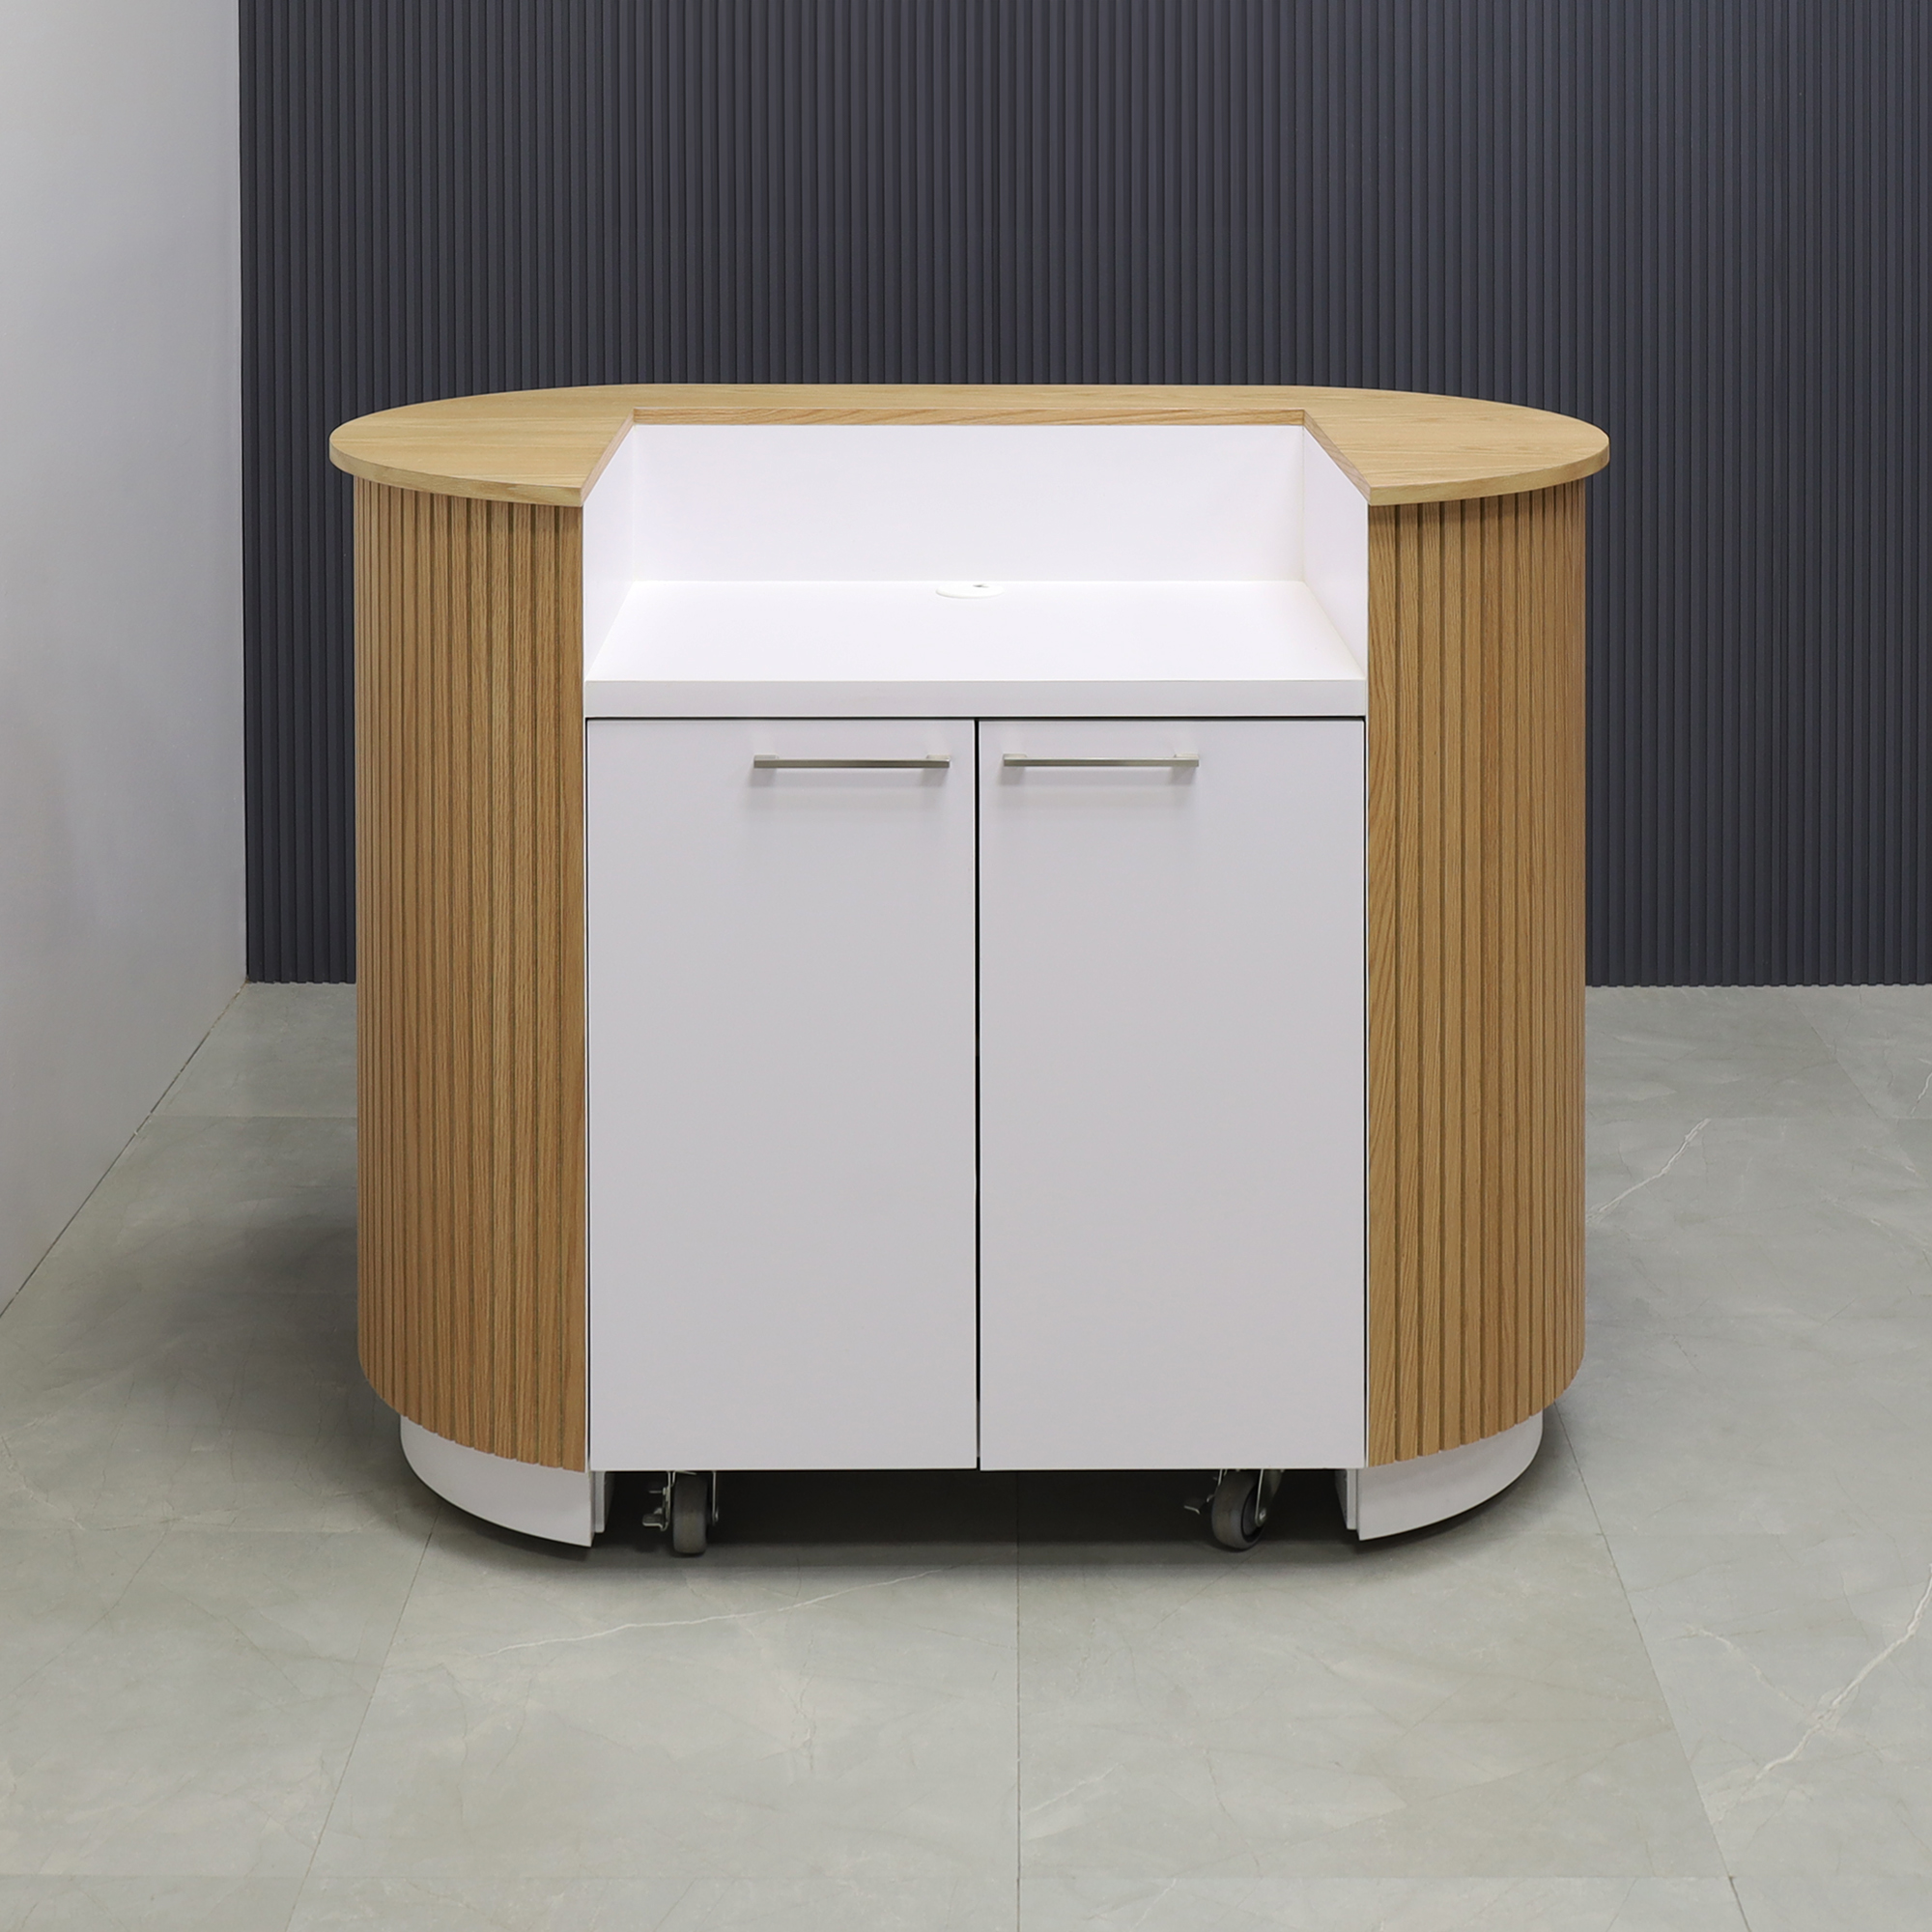 48-inch The Pill Podium & Host Custom Desk in white oak veneer top & front desk, with white matte laminate inside desk and toe-kick. Two doors and adjustable shelf, and set of 4 wheels added, shown here.